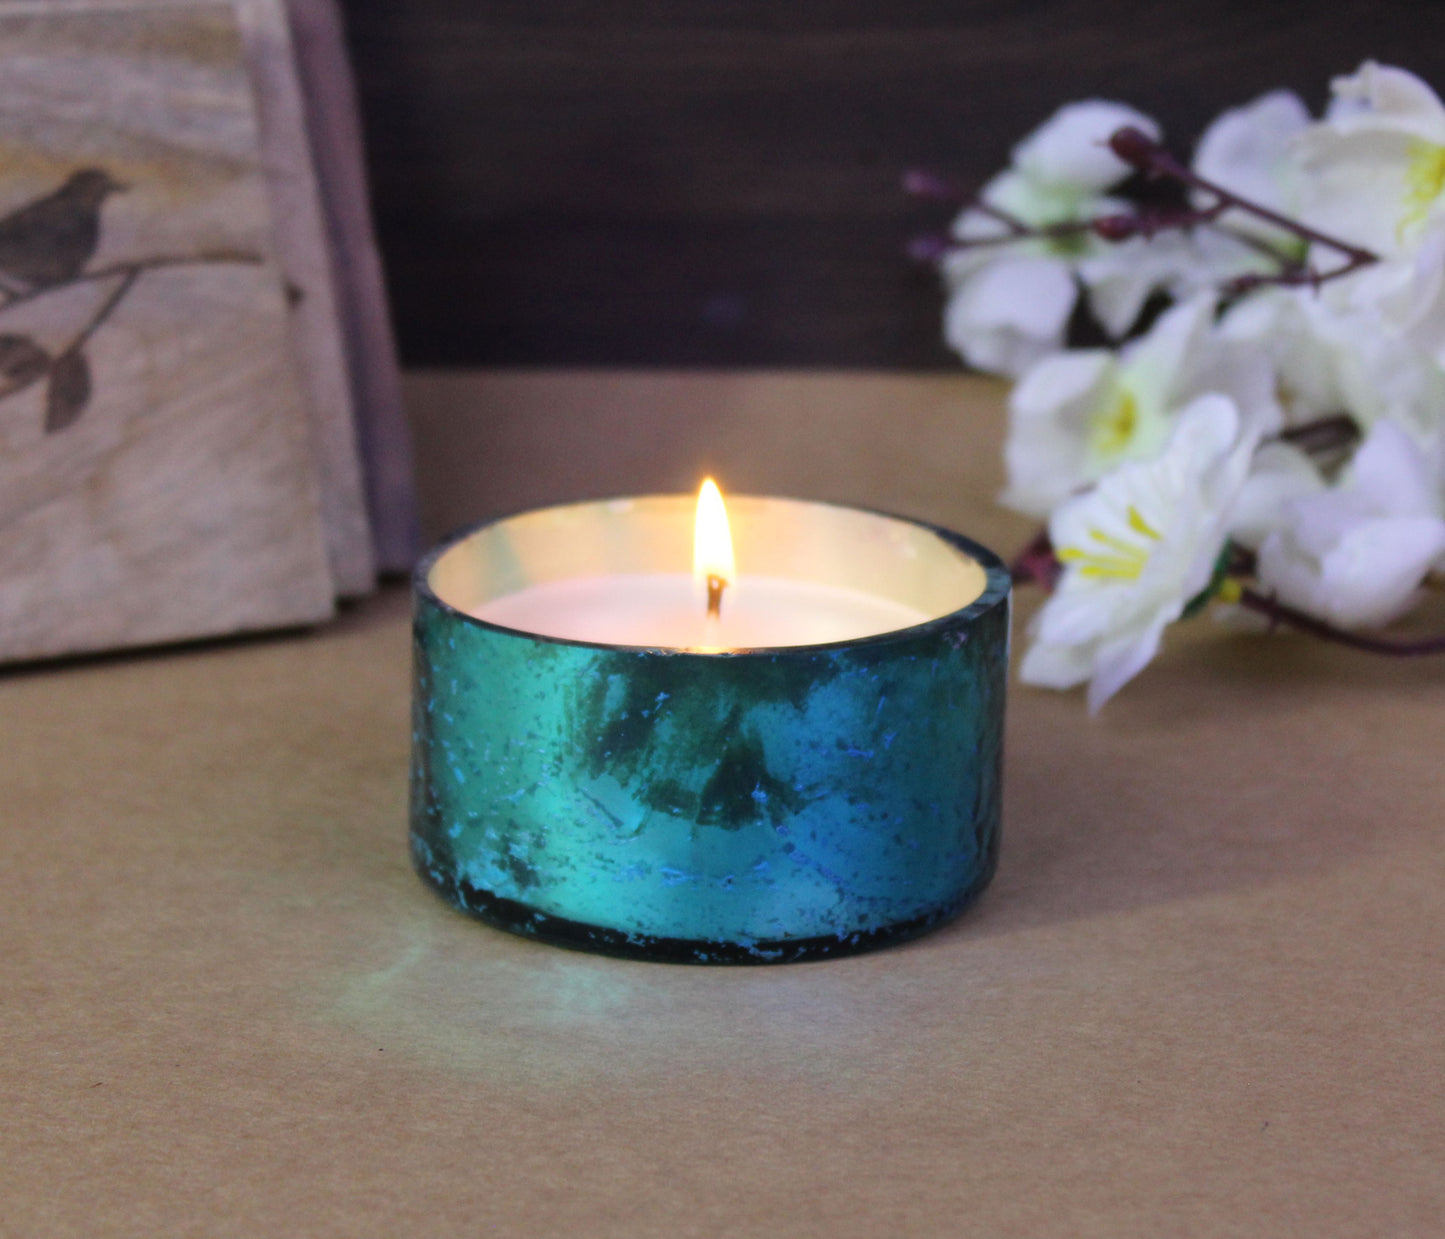 Hosley Sweet Pea Jasmine Fragrance Mercury Sky Blue Round  Glass Candle for Home Decoration/ Gifting/ Party